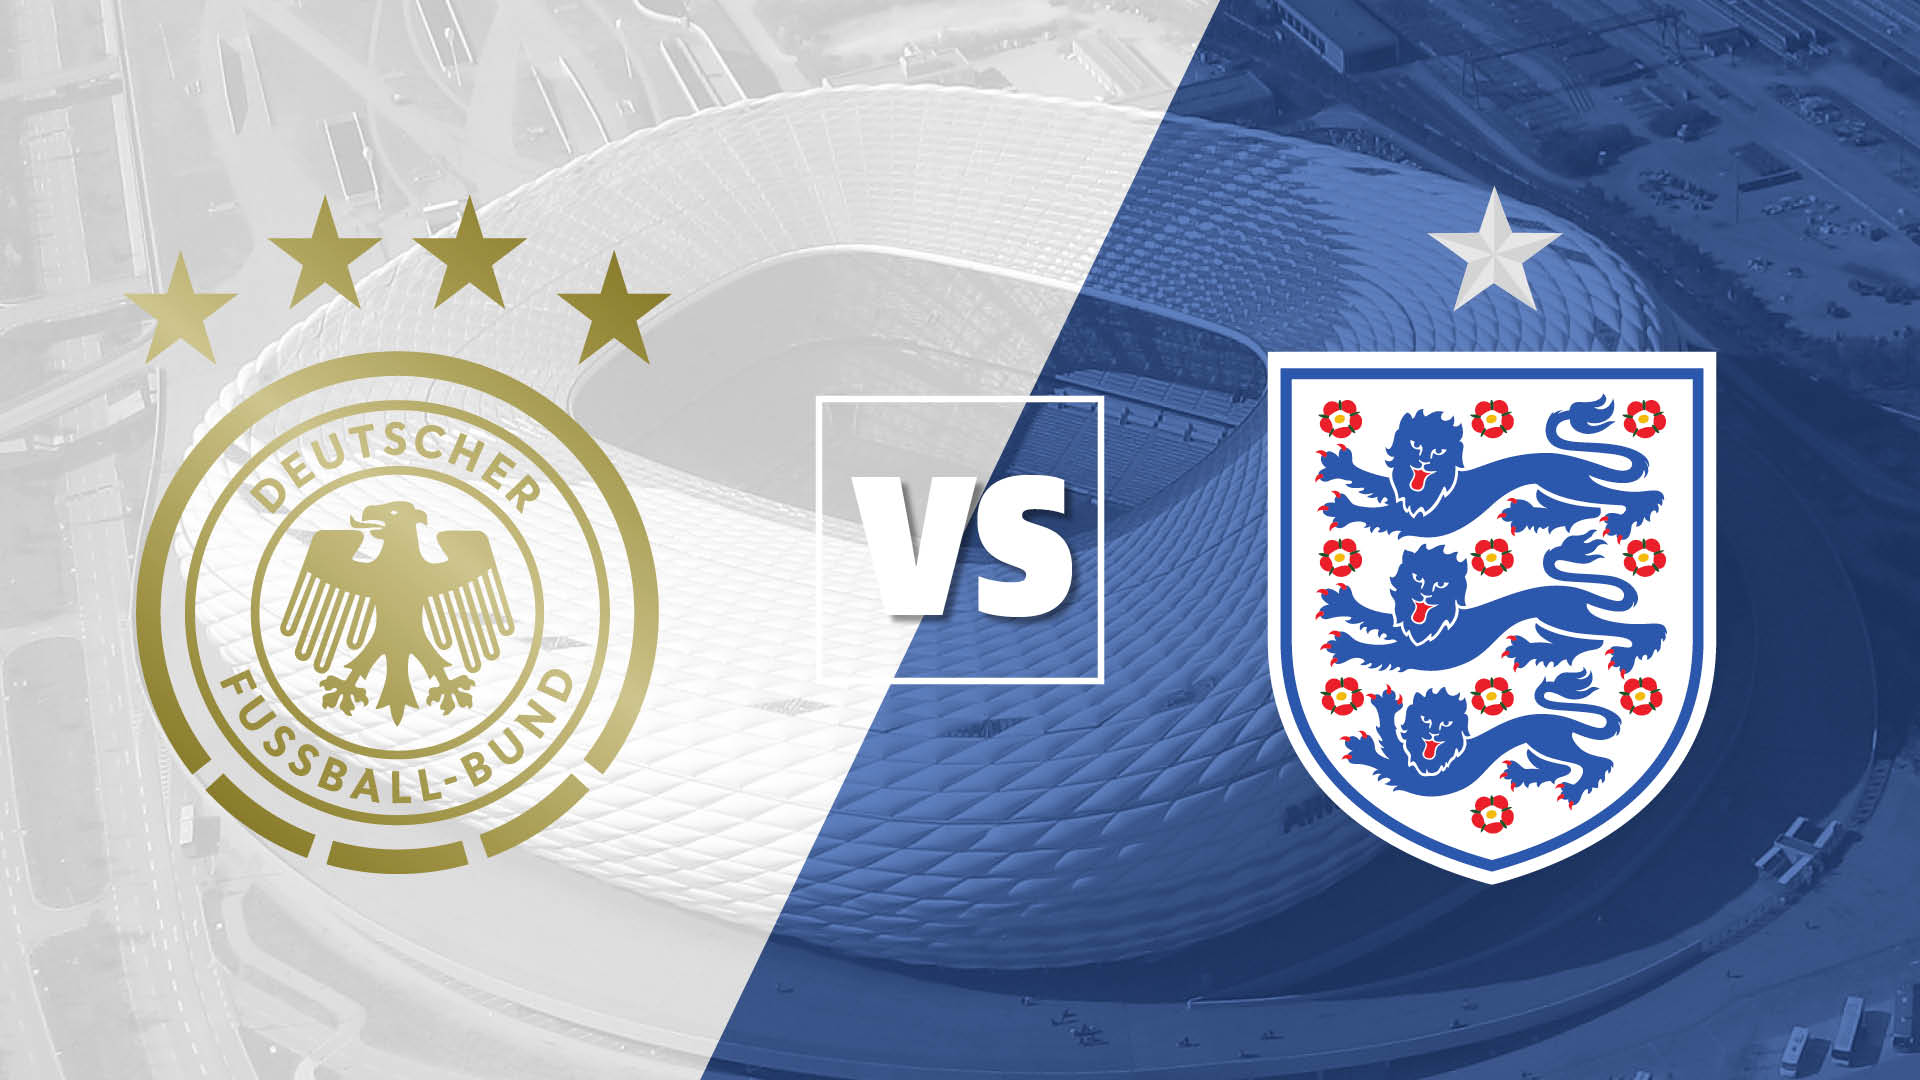 Germany vs England live stream and how to watch the UEFA Nations League